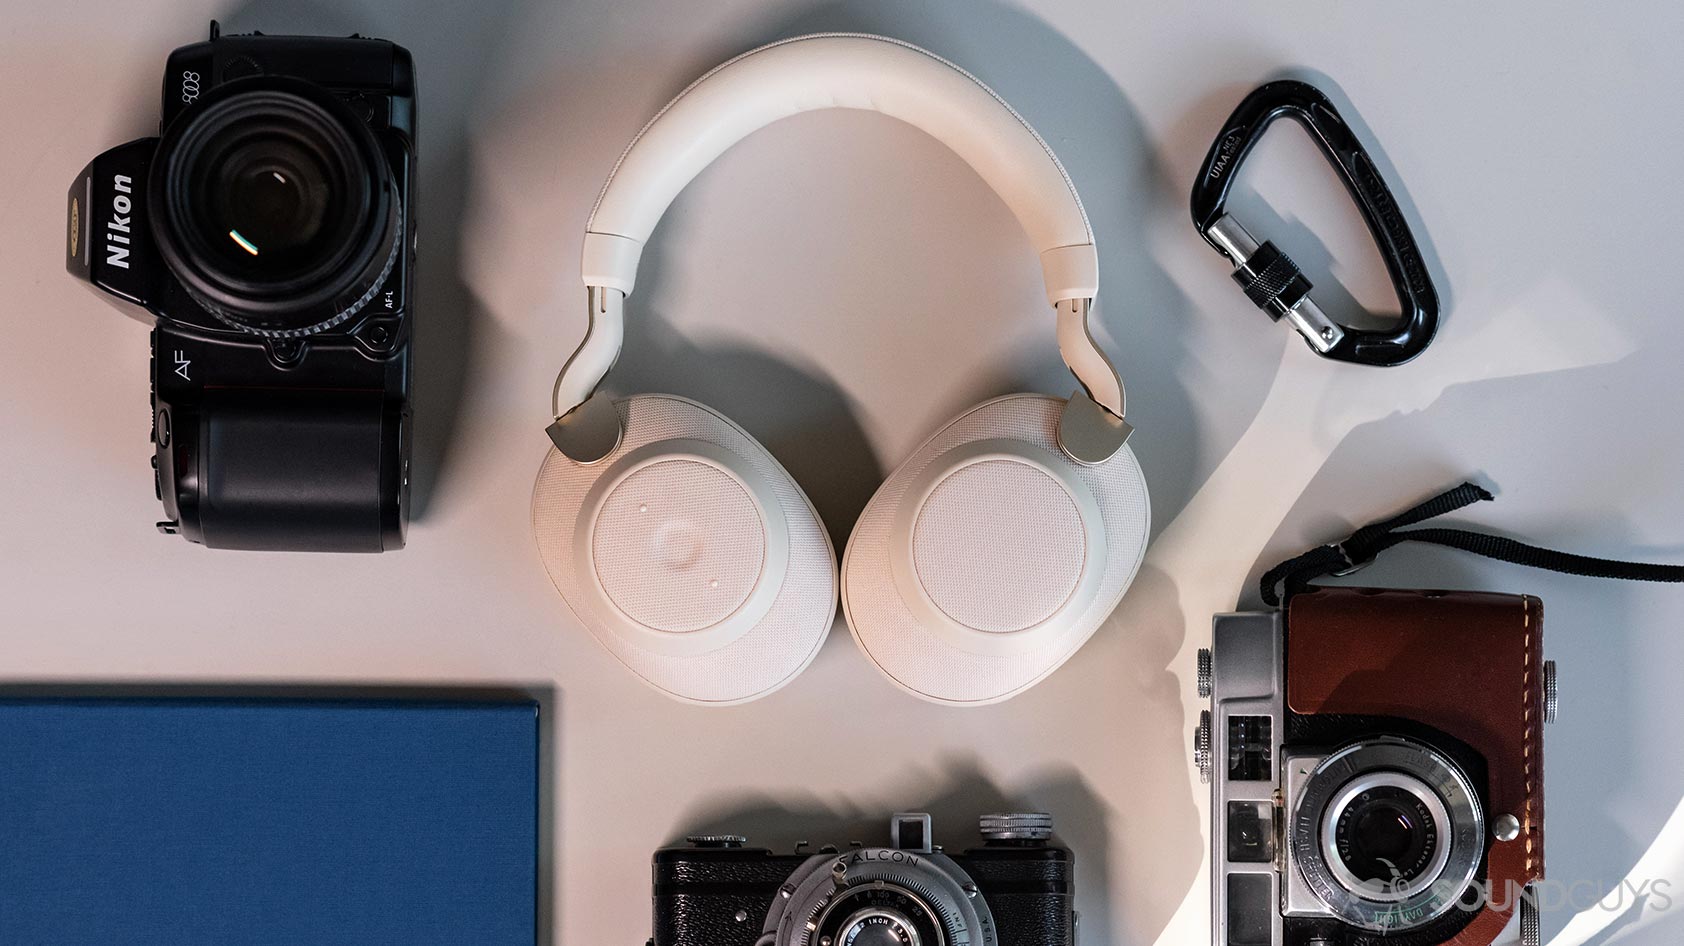 The Jabra Elite 85h headphones folded flat on a table and surrounded by vintage cameras, a blue notebook, and a black carabiner.